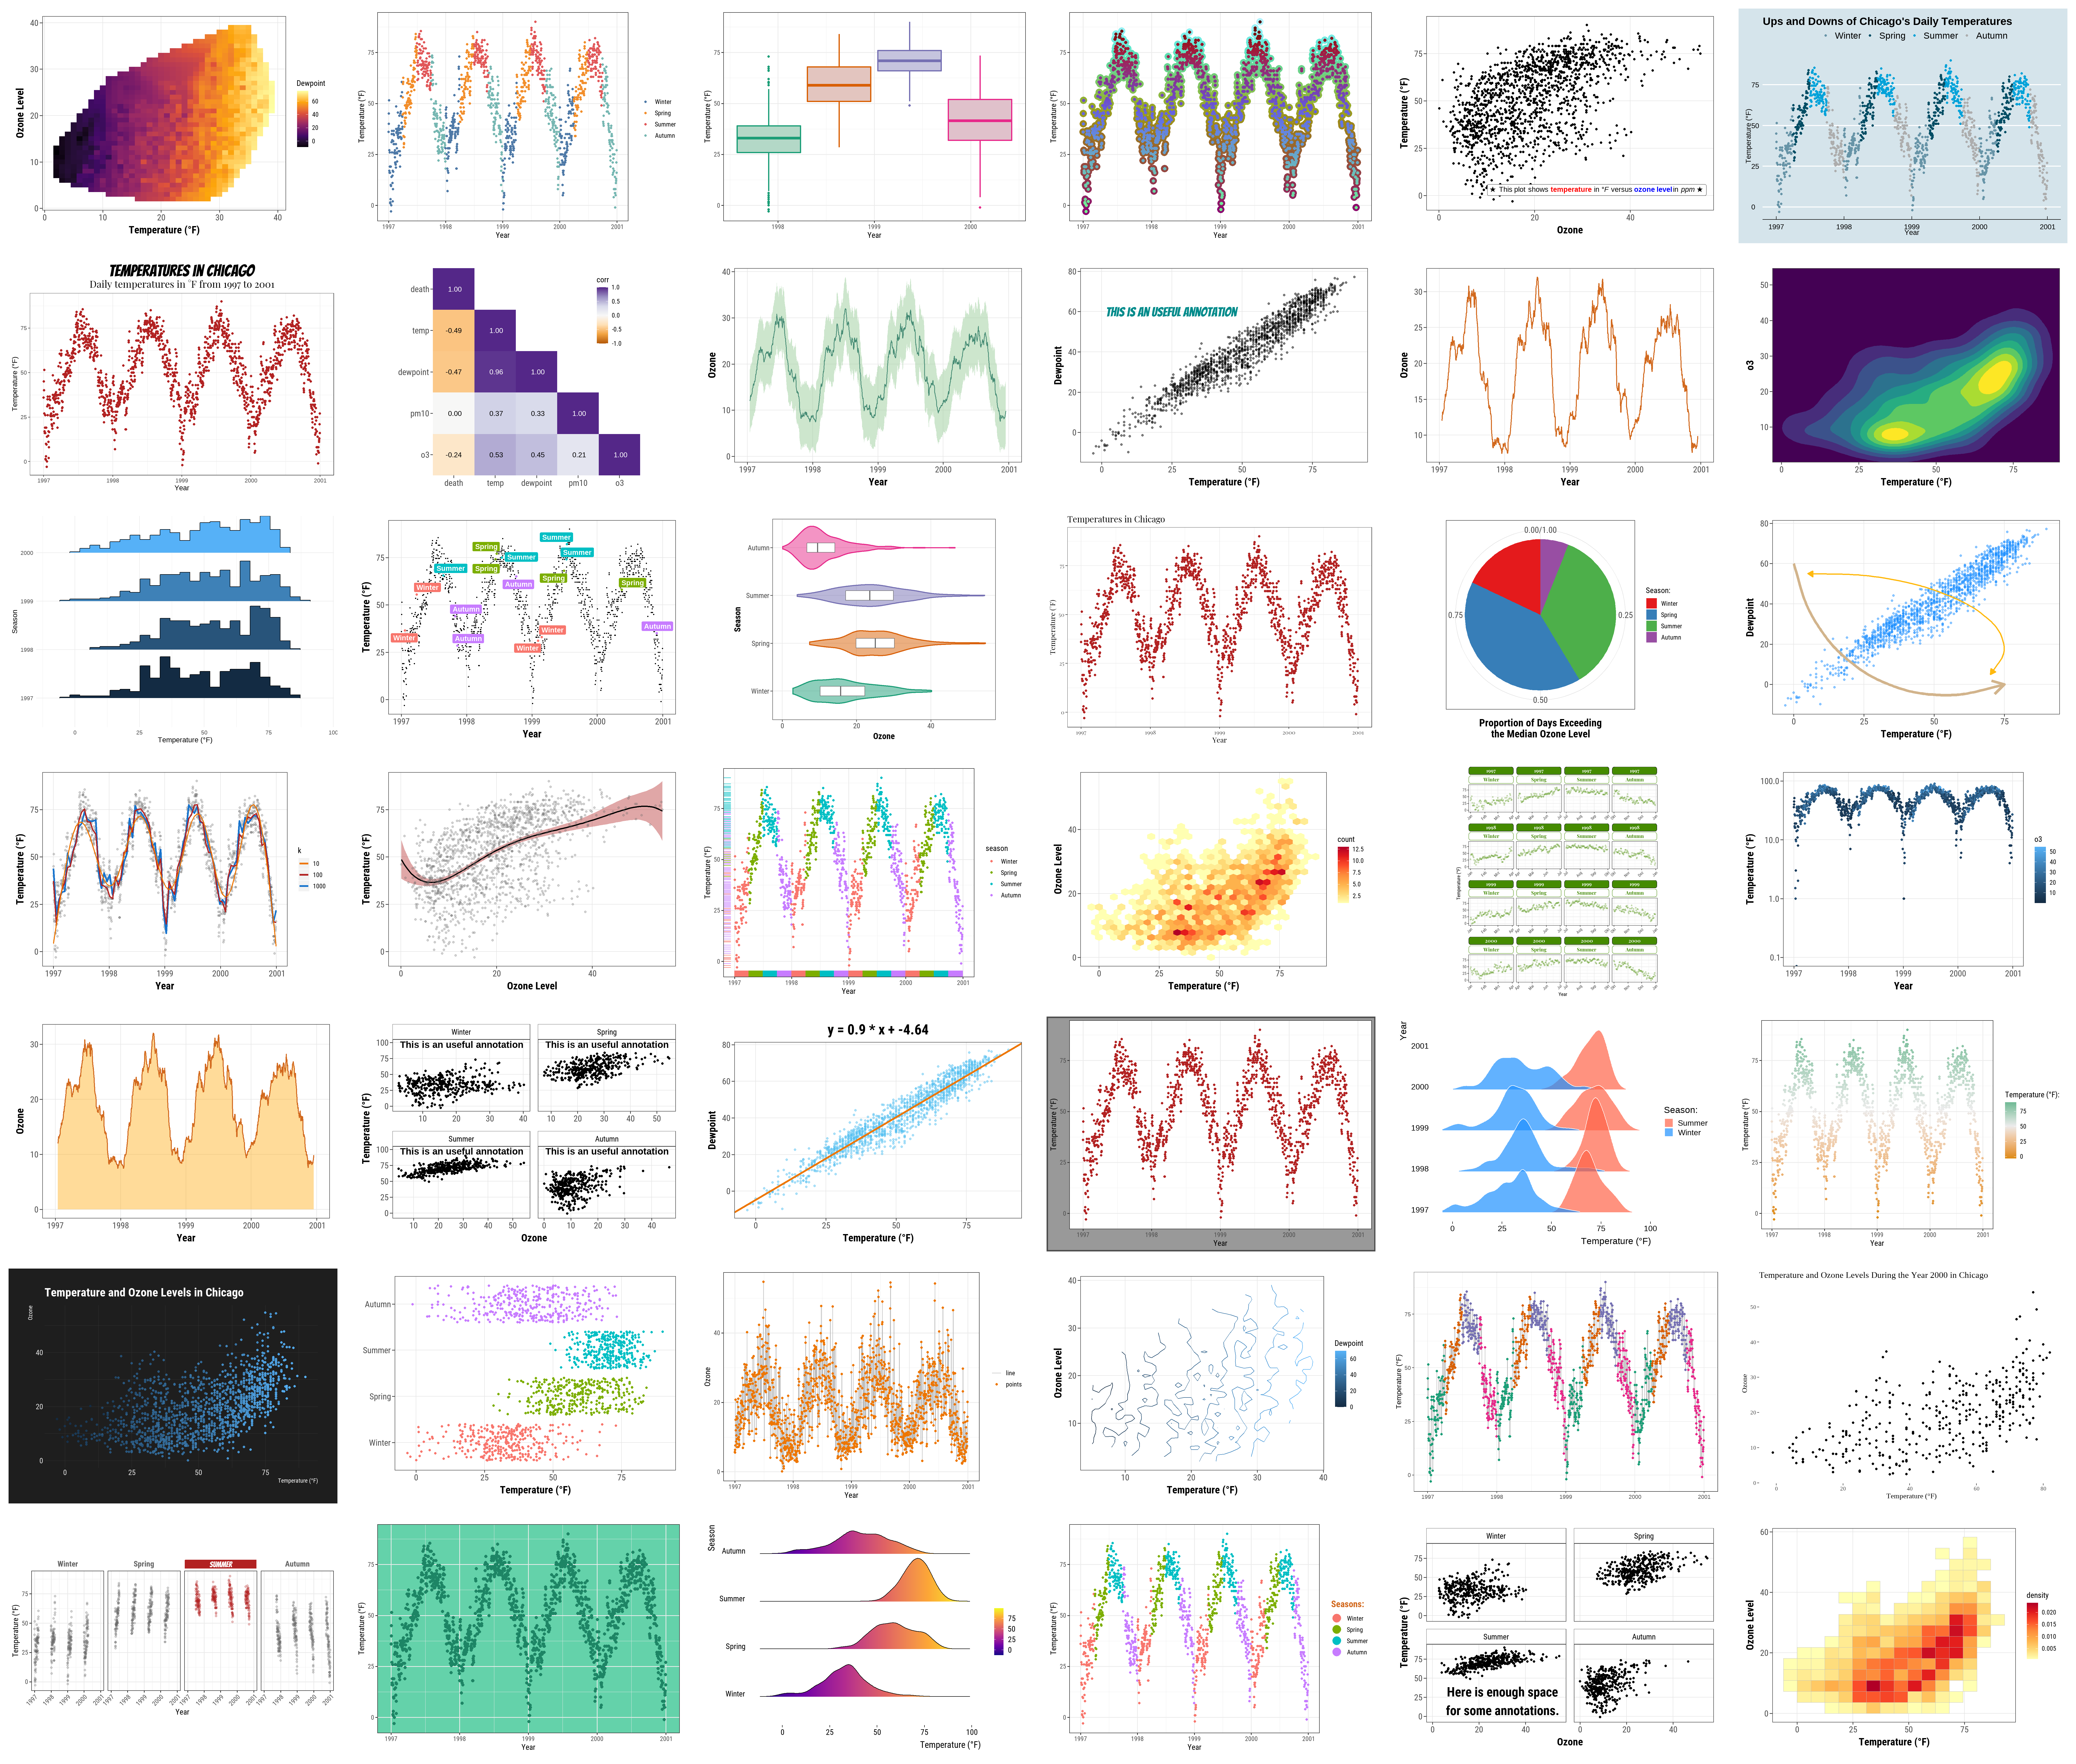 ggplot2-tutorial-overview.png